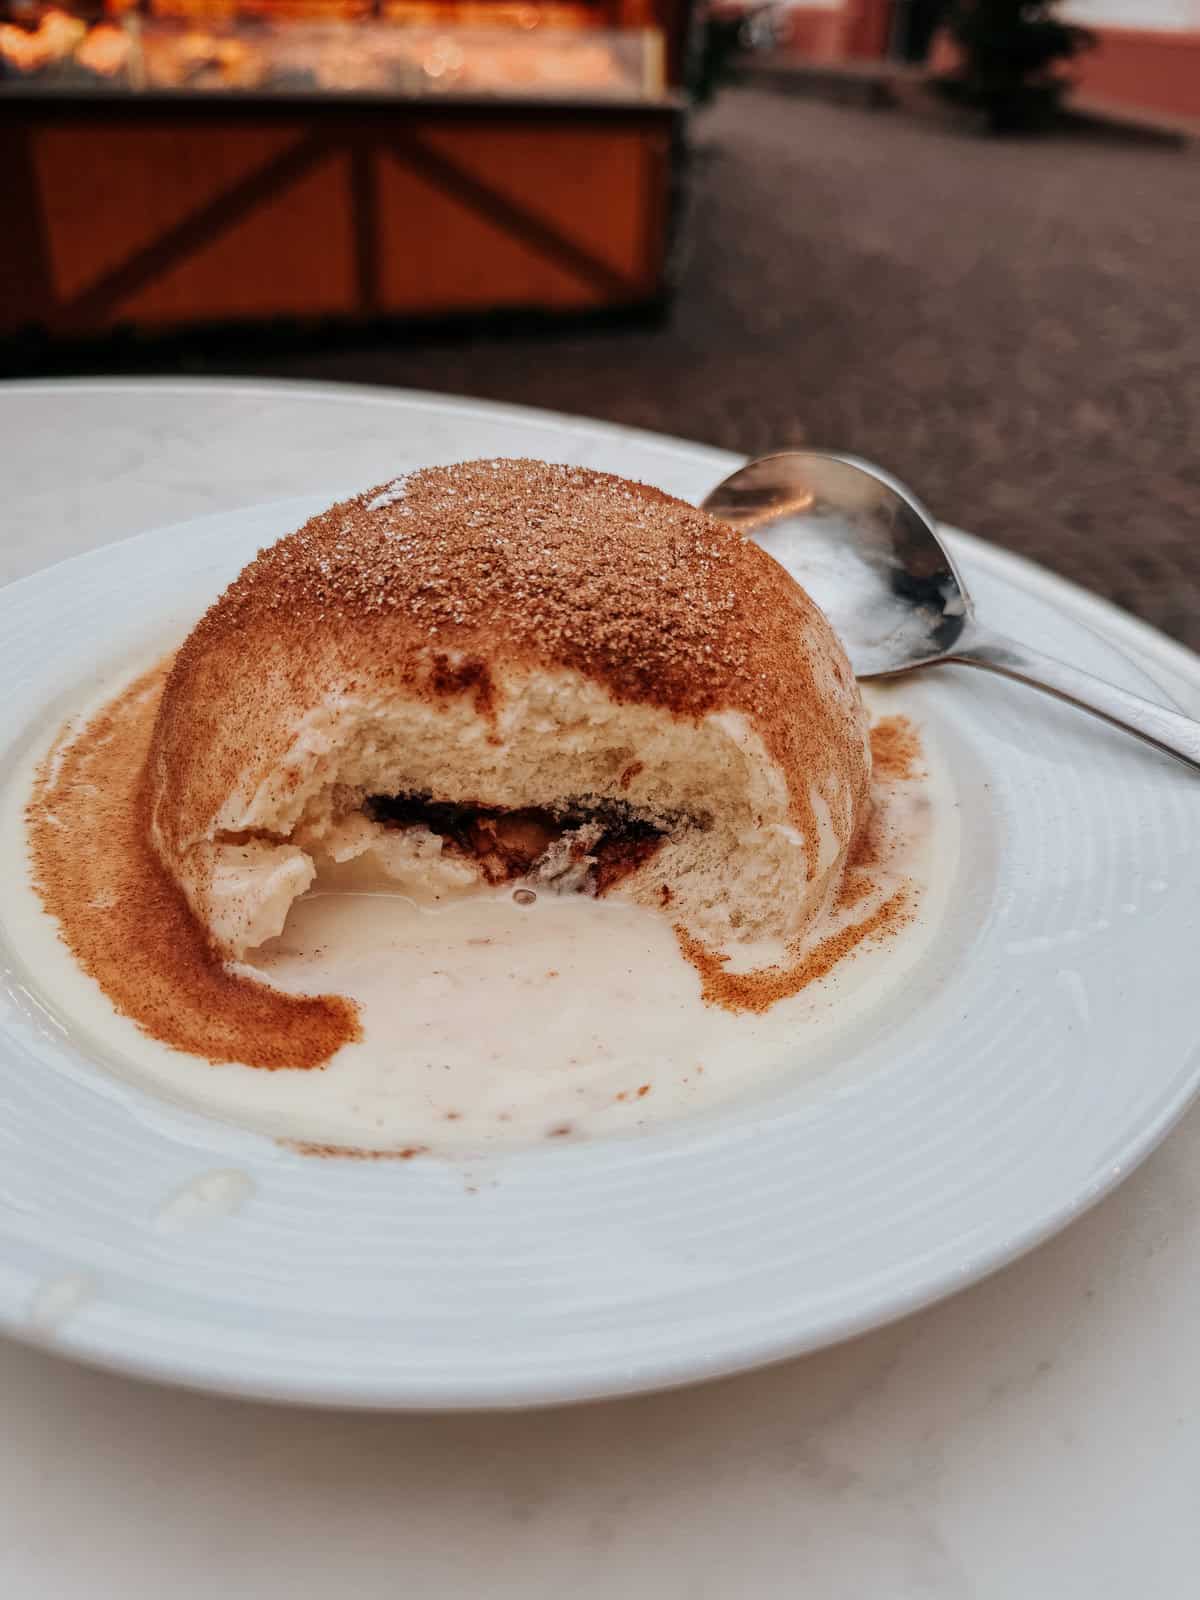 A close-up of a Dampfnudel, a German steamed bun, cut open and served on a white plate with vanilla sauce, sprinkled with sugar.